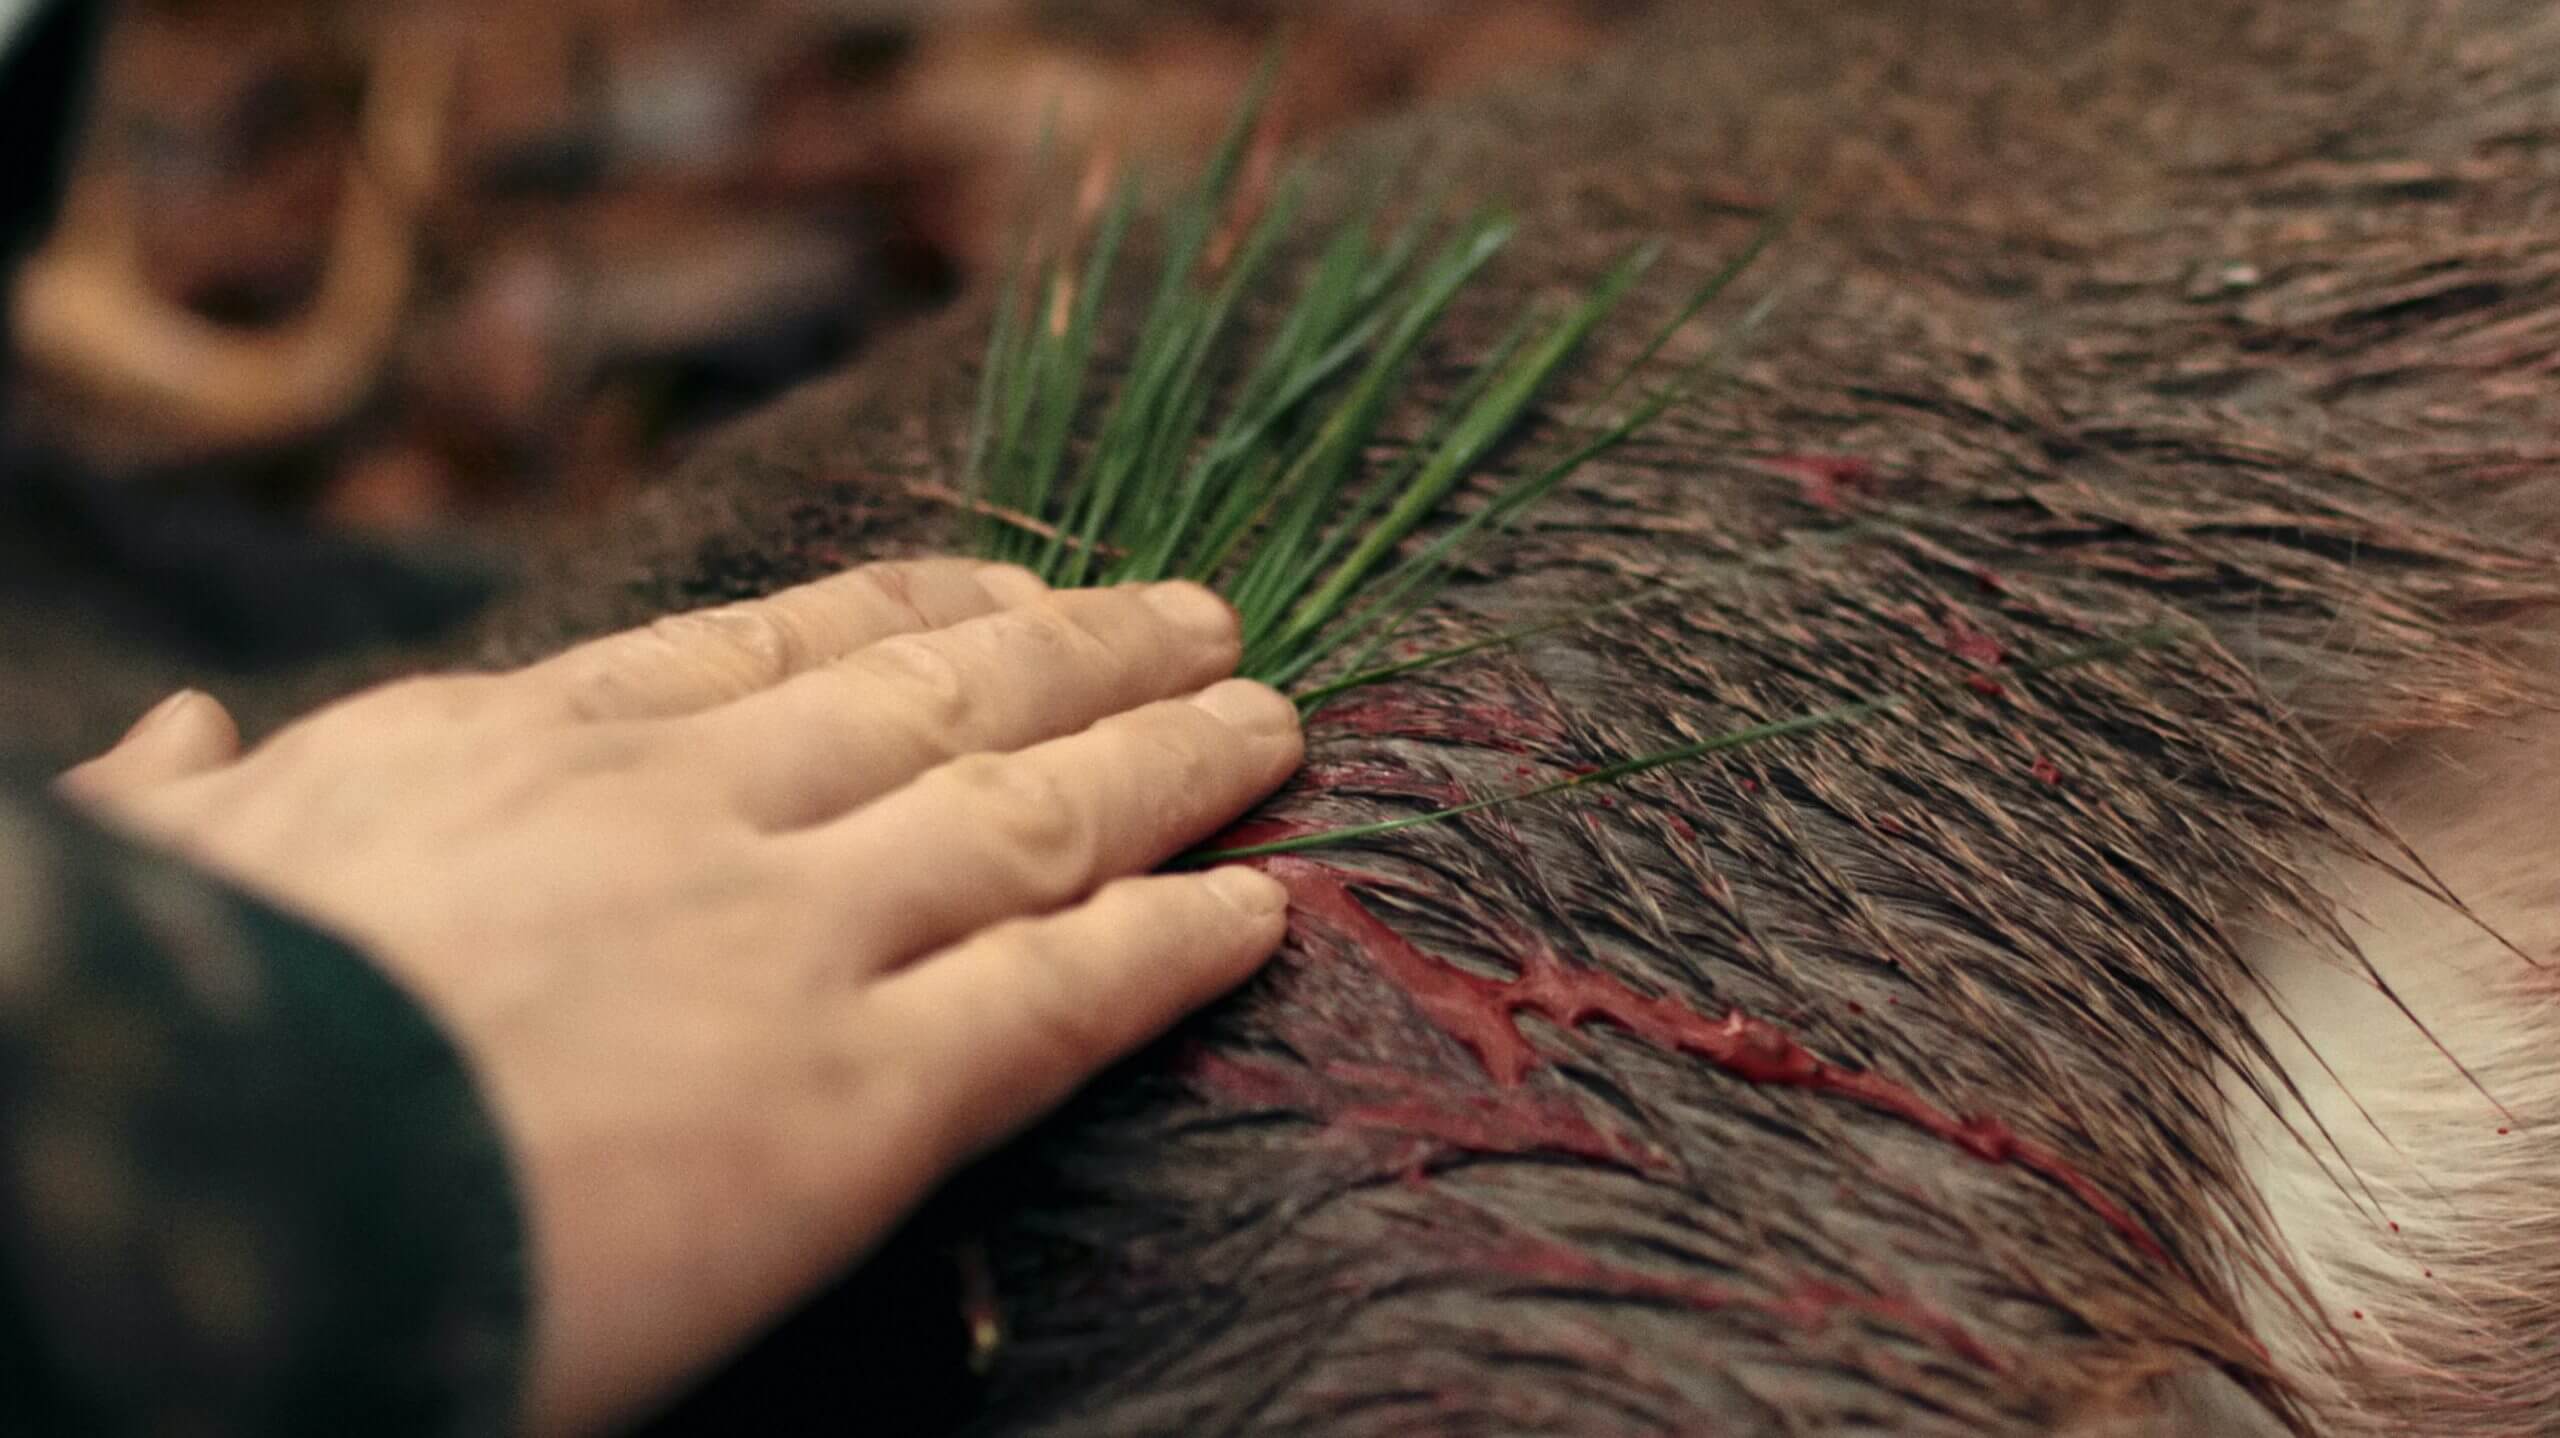 Still from One Shot One Kill. A hand holds a few blades of grass over a bloodied animal body.